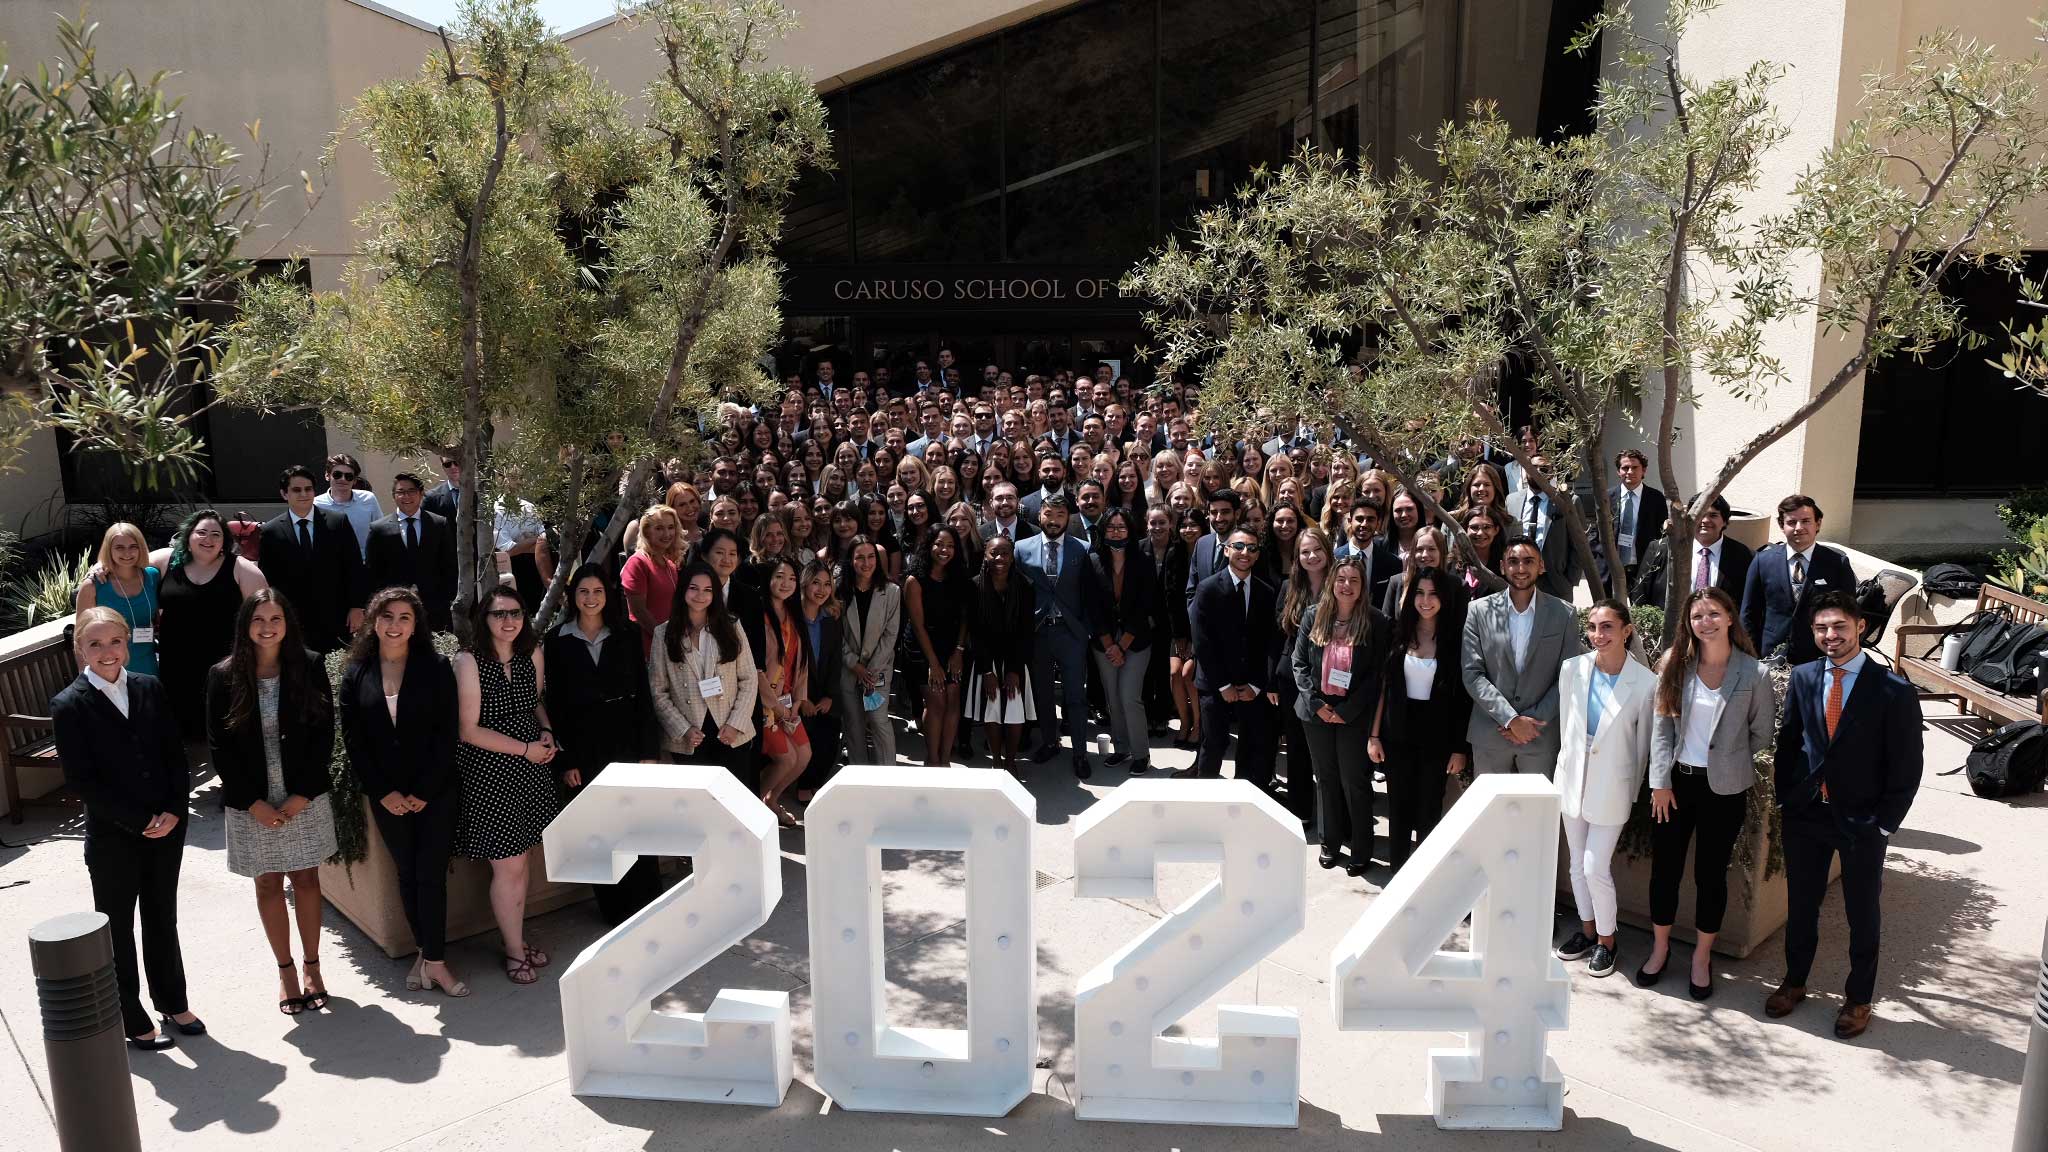 The Class of 2024 group photo in front of the Caruso School of Law